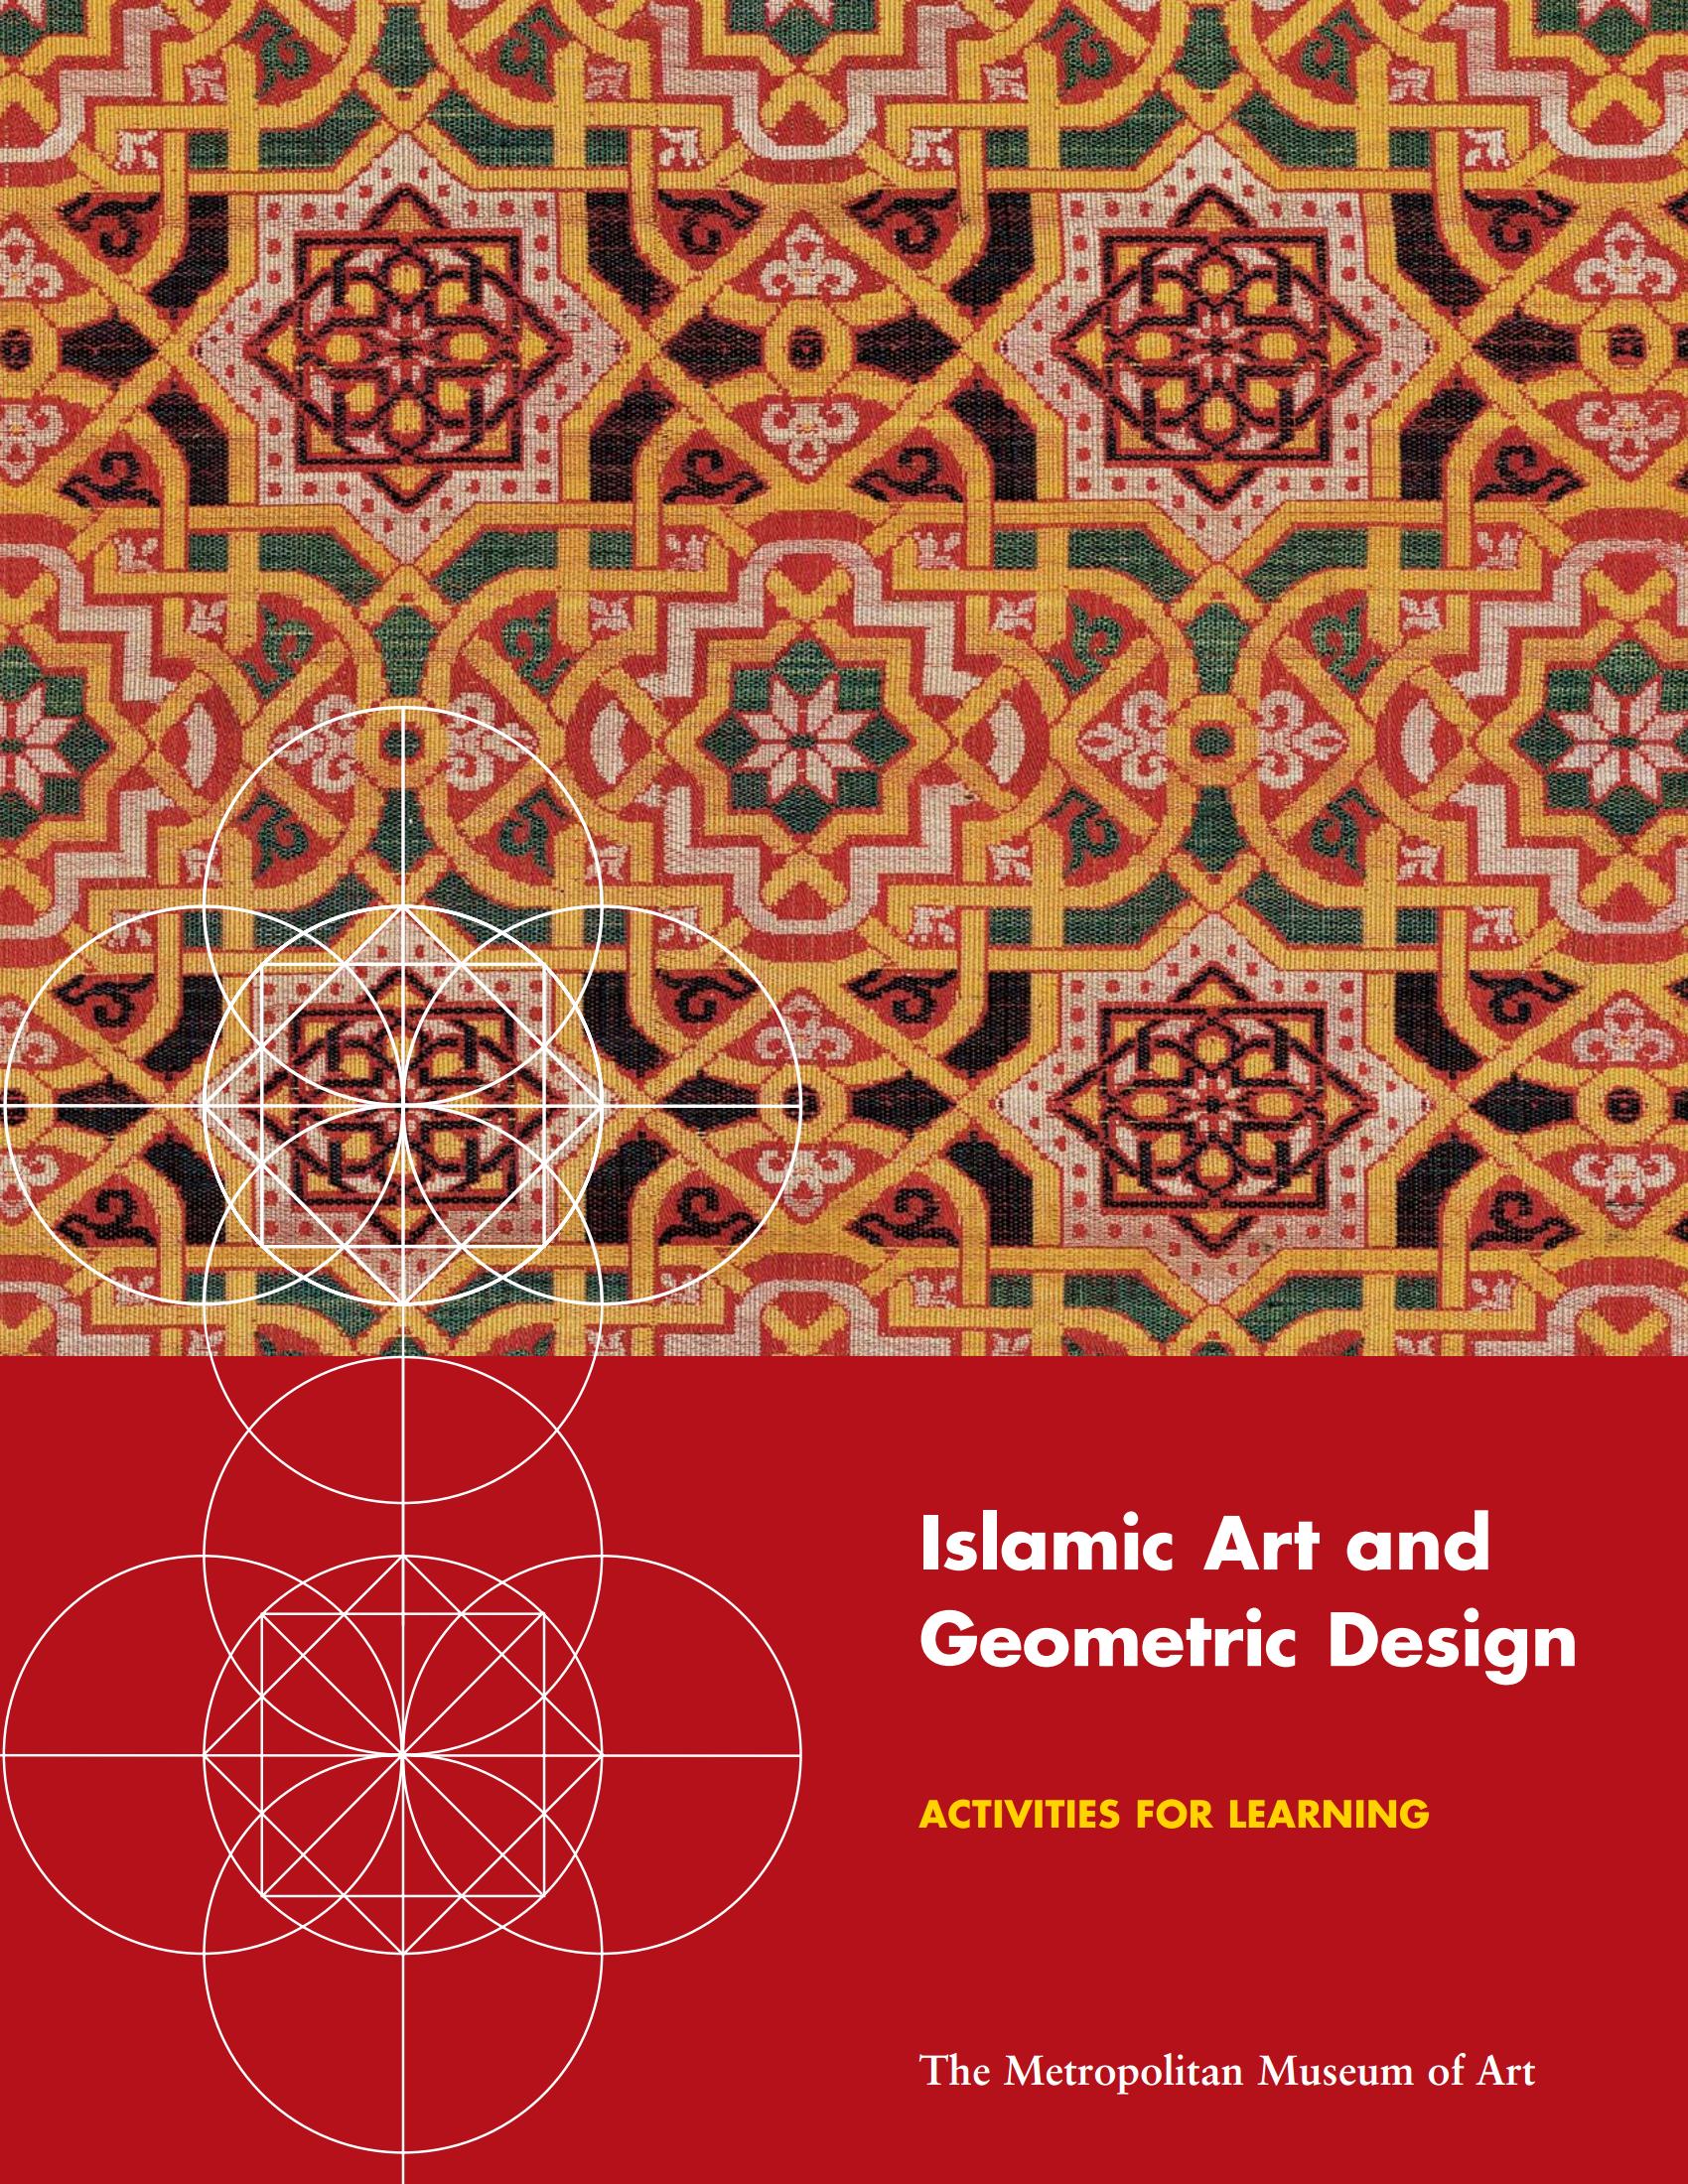 Islamic Art and Geometric Design : Activities for Learning. — New York : The Metropolitan Museum of Art, 2004